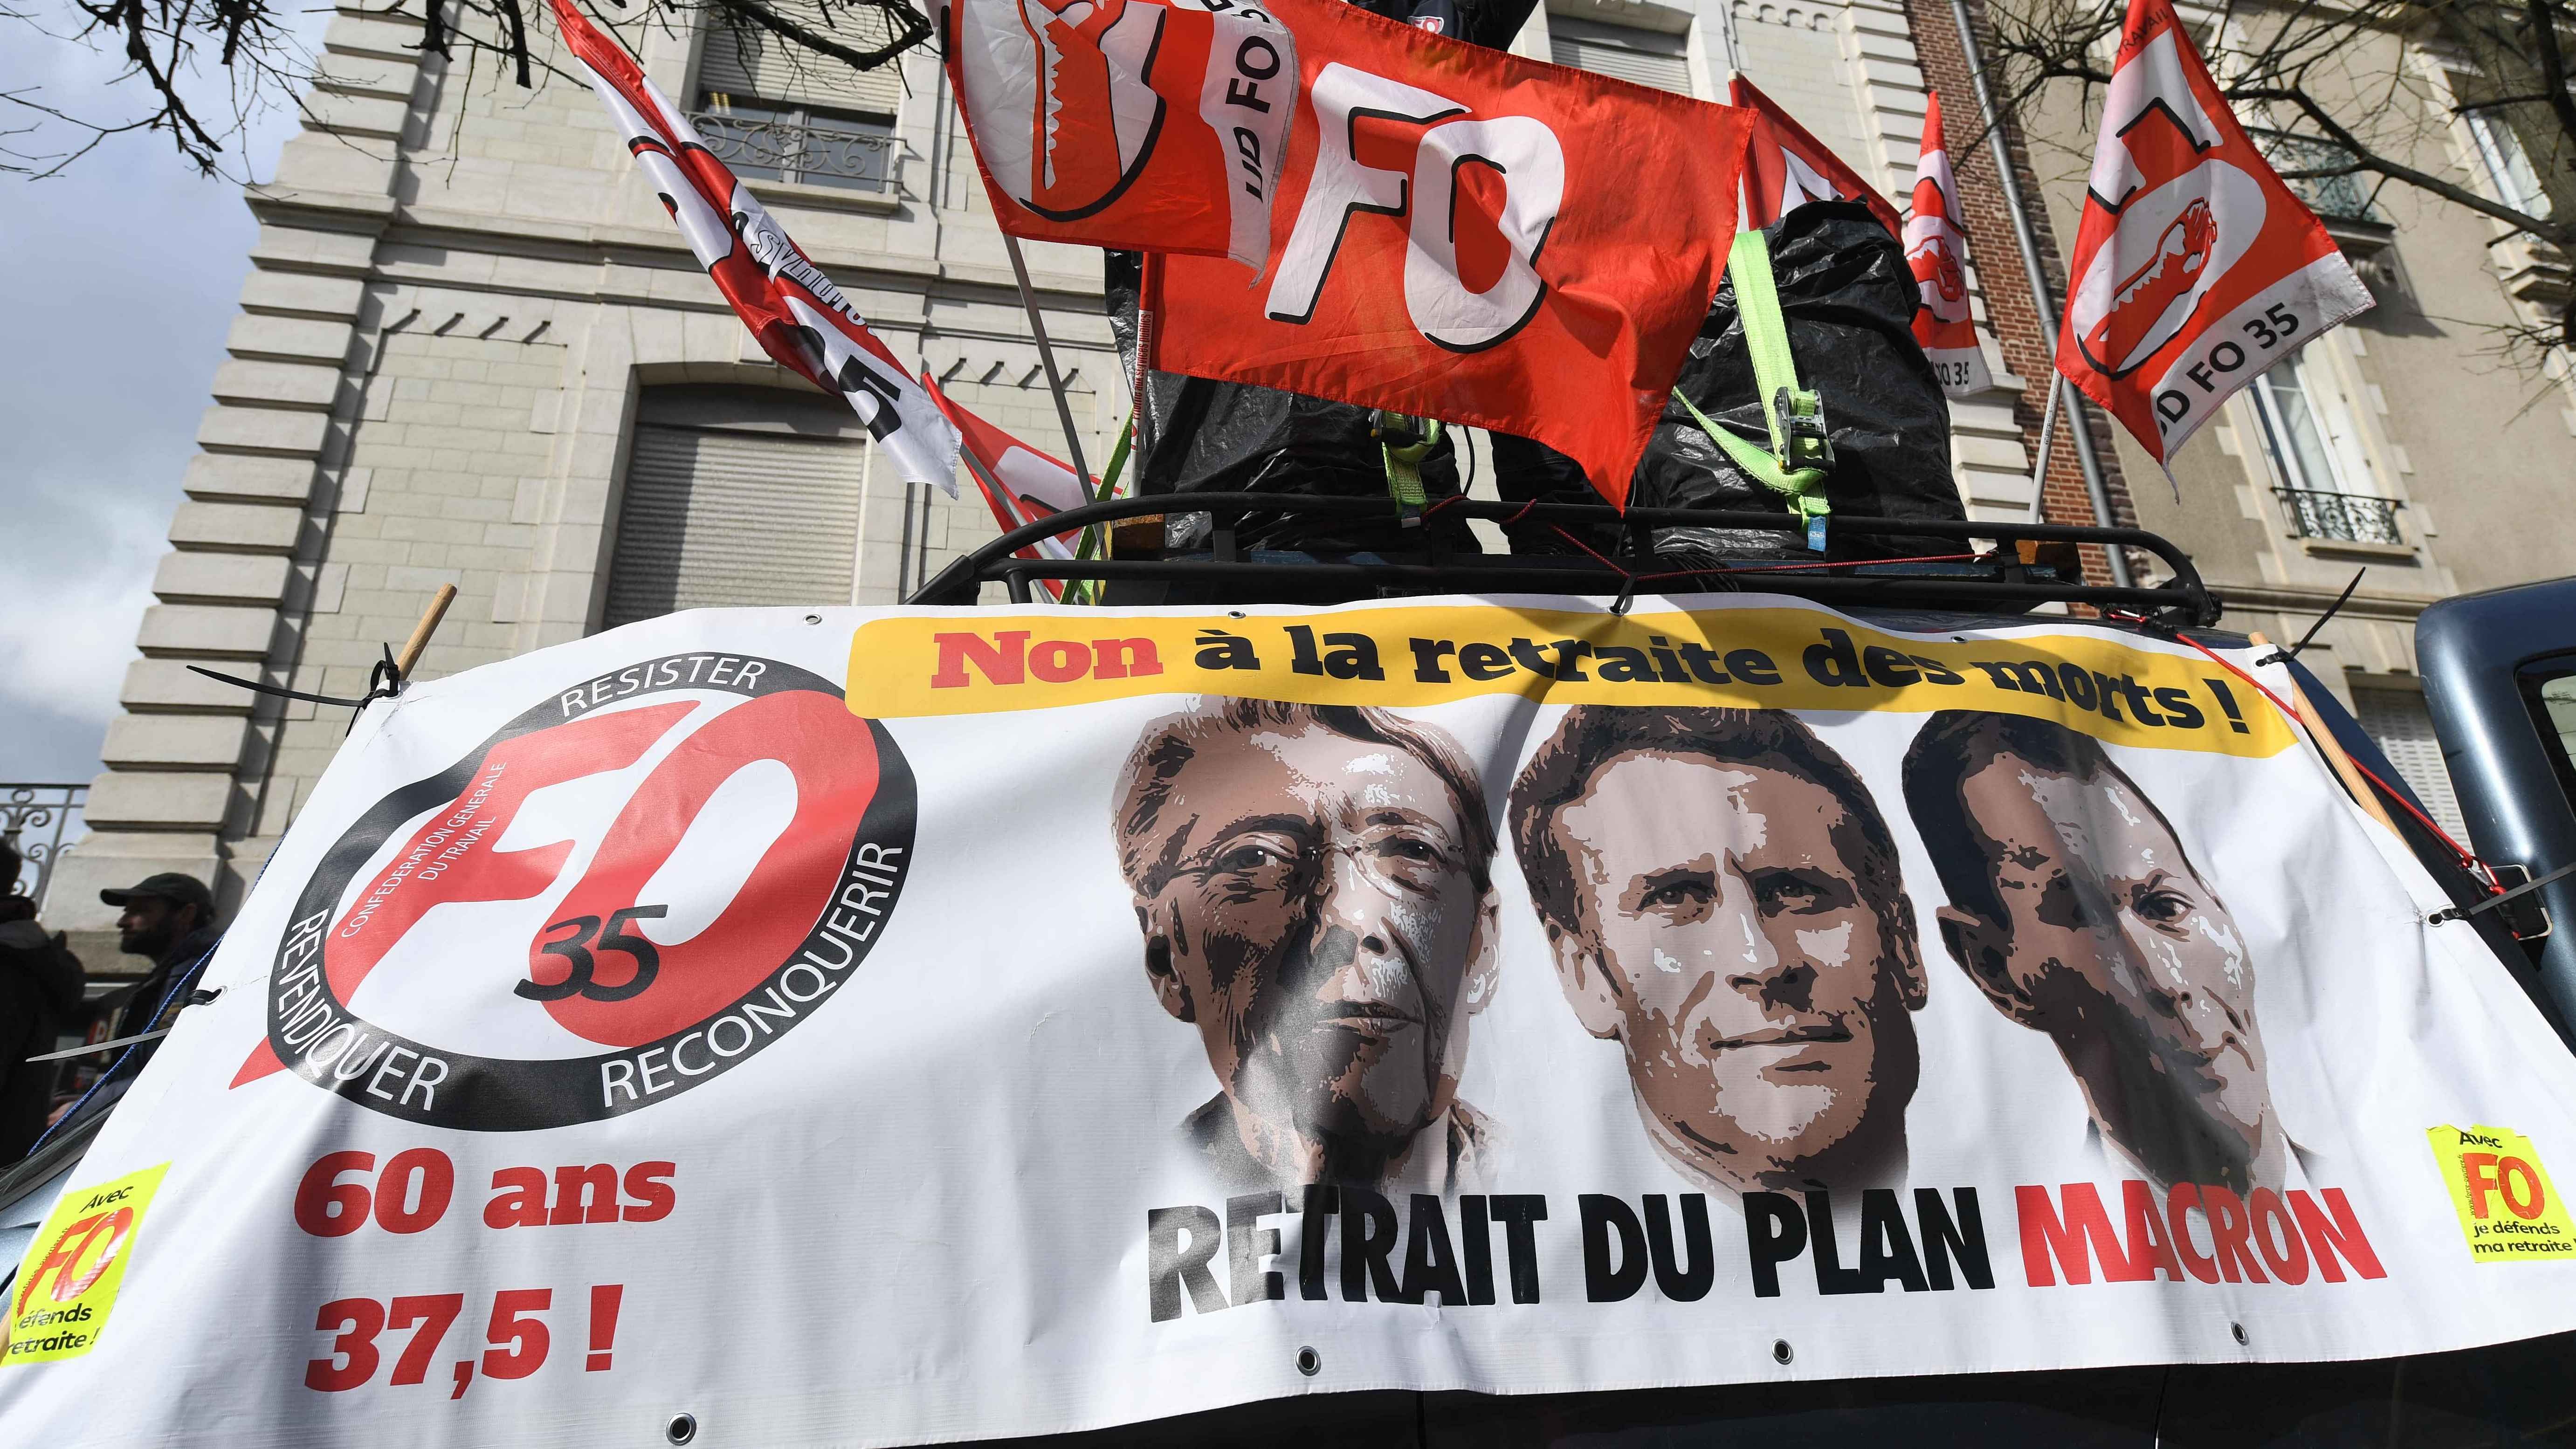 A protester speaks above a banner depicting (L-R) French Prime Minister Elisabeth Borne, French President Emmanuel Macron and French Labour Minister Olivier Dussopt reading "No to the retirement of the dead, withdrawal of Macron's plan" during a demonstration a day after the French government pushed a pensions reform through parliament without a vote, using the article 49.3 of the constitution, in Rennes, western France. Credit: AFP